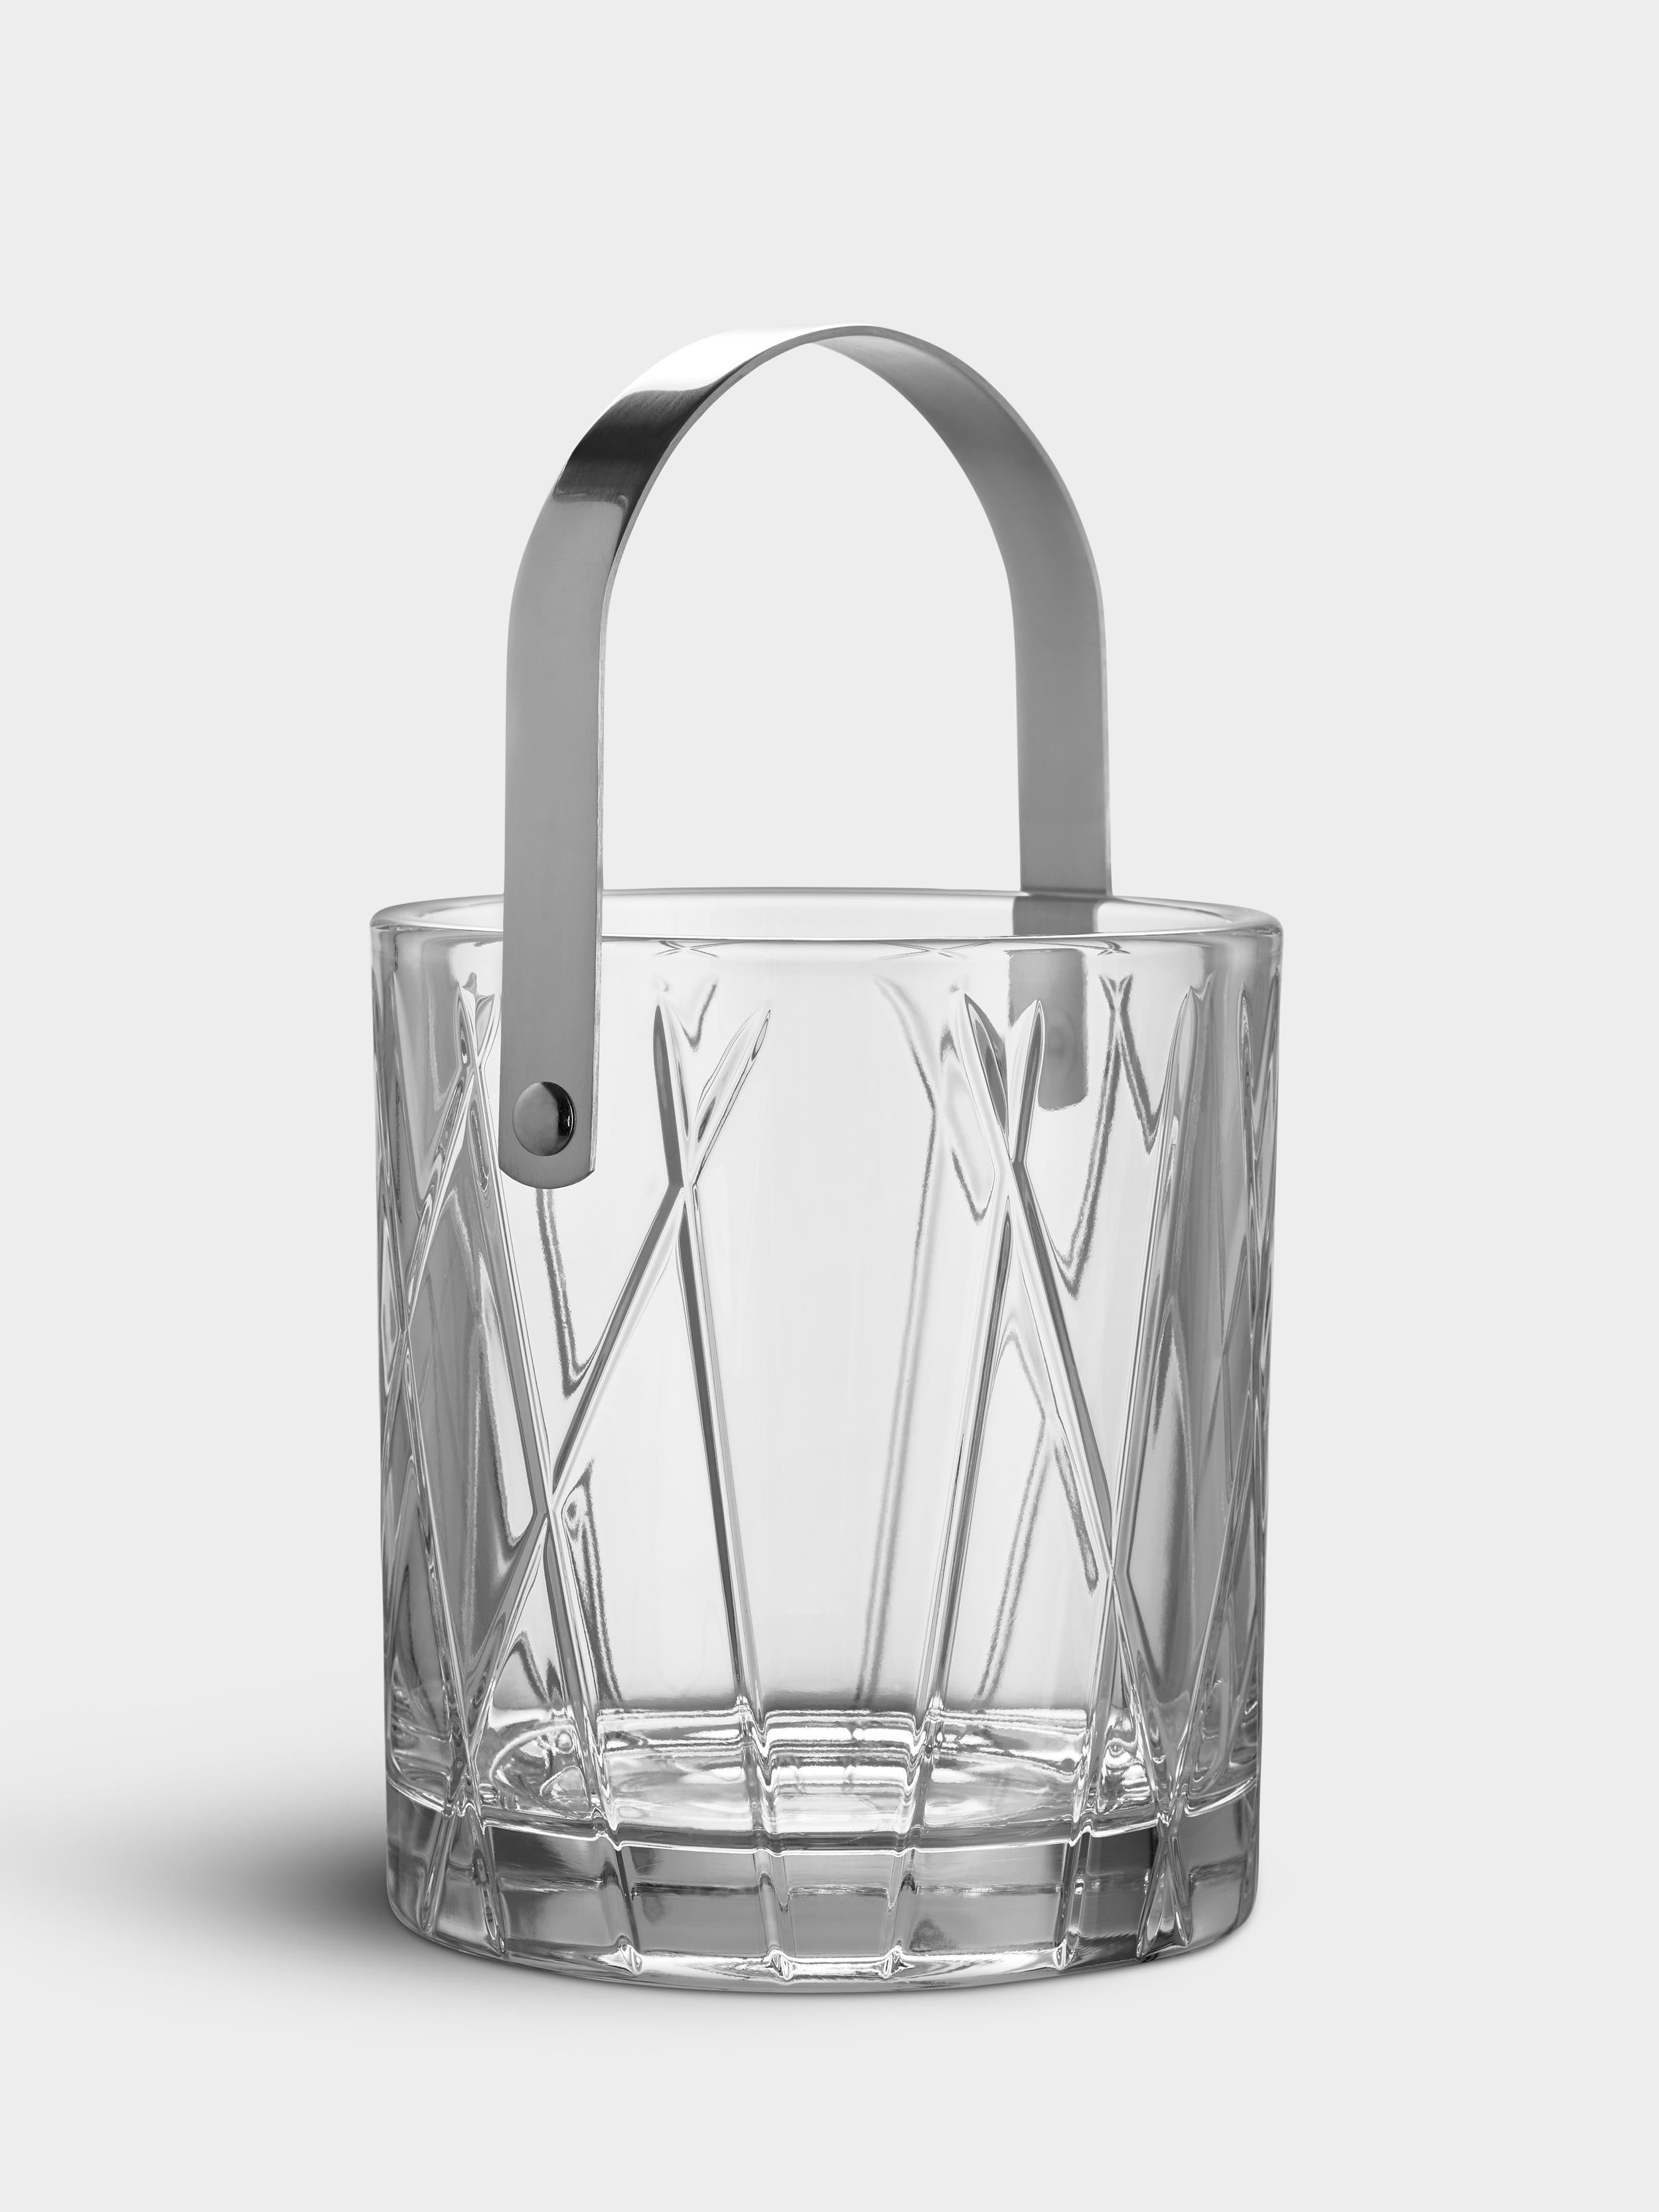 City Ice Bucket from Orrefors is ideal for holding ice for drinks or for chilling a bottle of wine. The cuts that criss-cross the surface of the crystal create an asymmetric look, which contributes to the distinct identity of the collection.